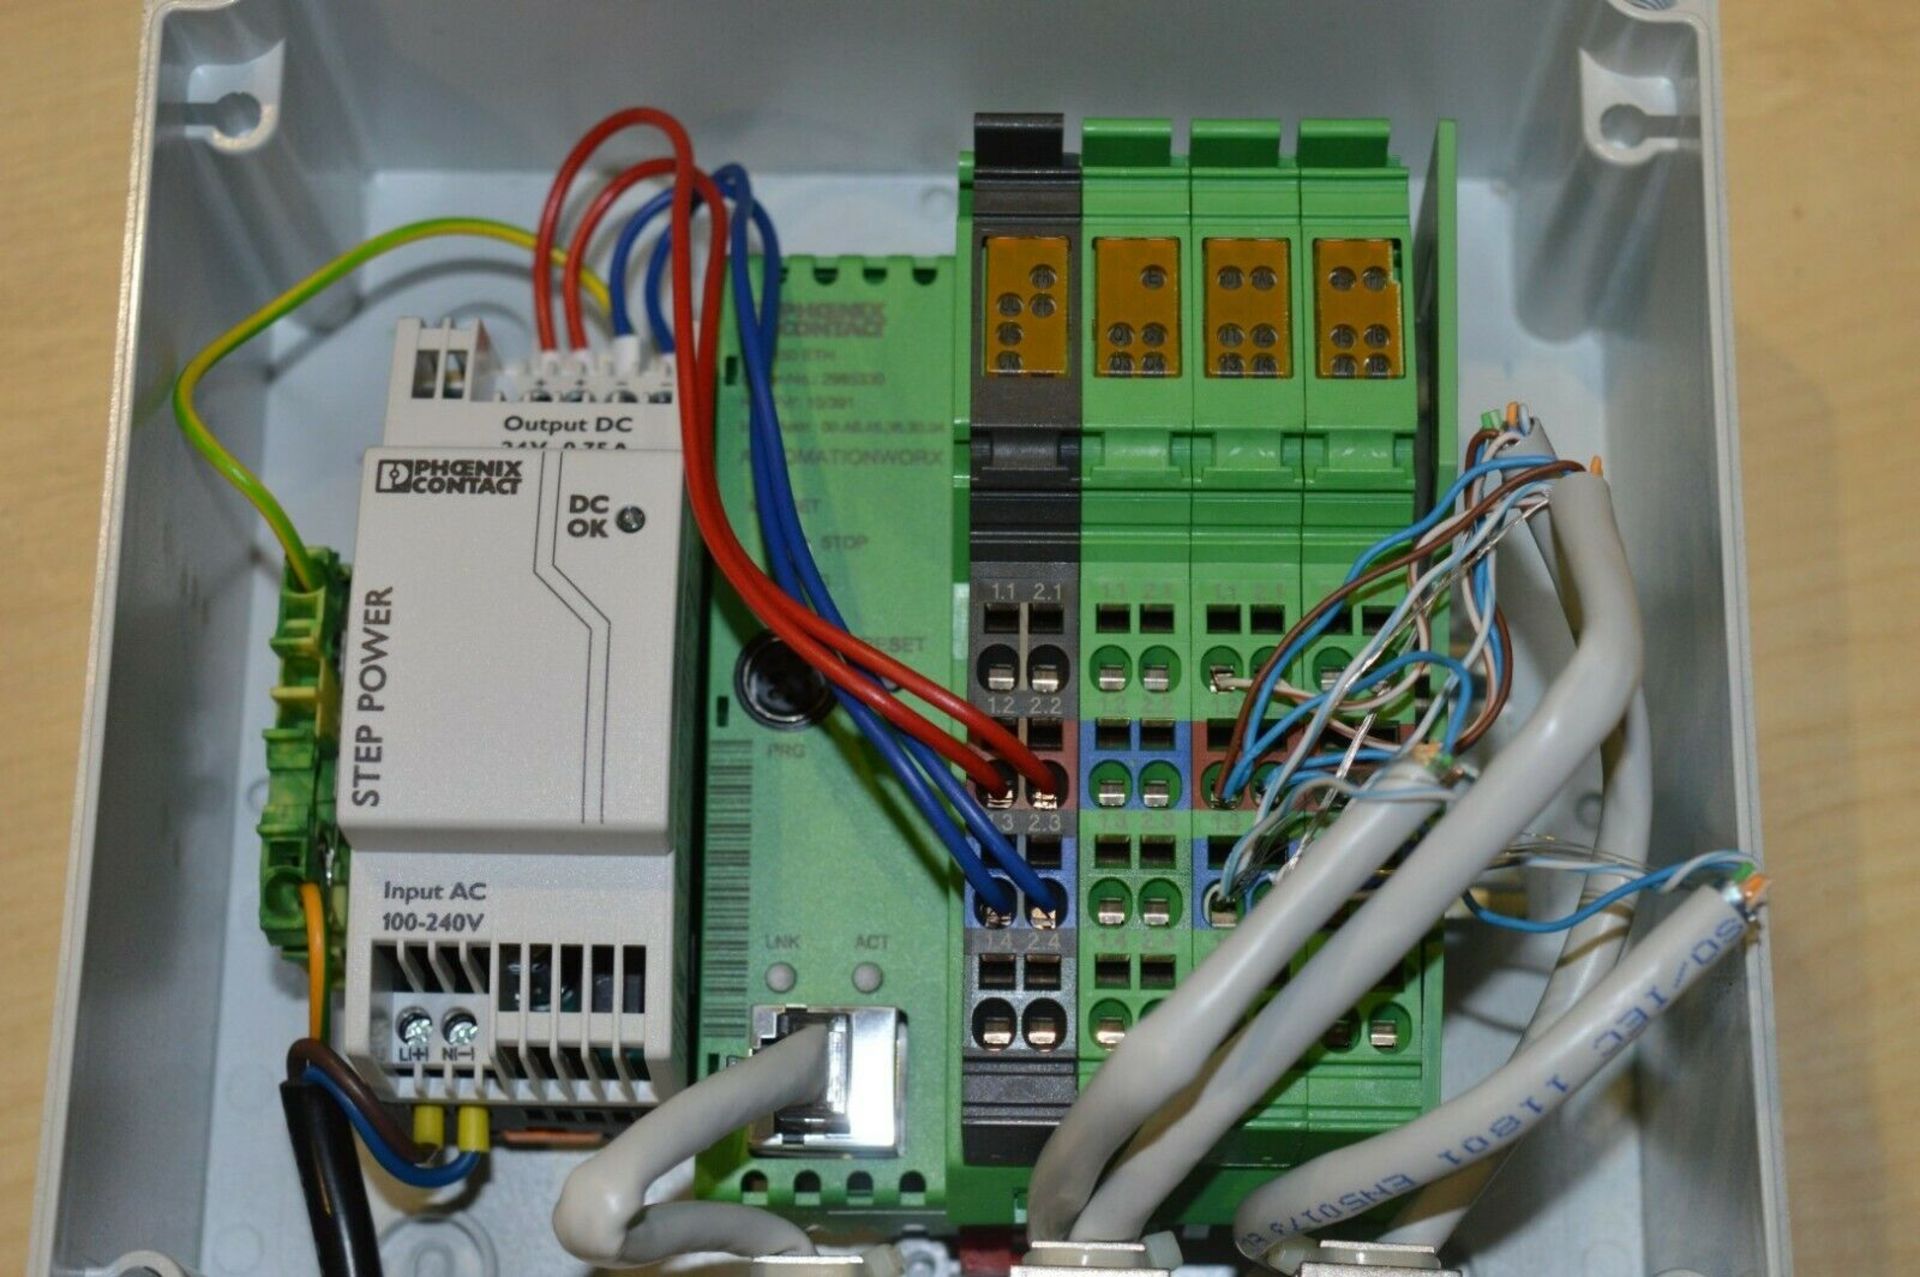 1 x Phoenix Contact Controller ILC 150 ETH 2985330 + Step Power and Enclosure - 240v UK Plug - WH1 - - Image 5 of 7